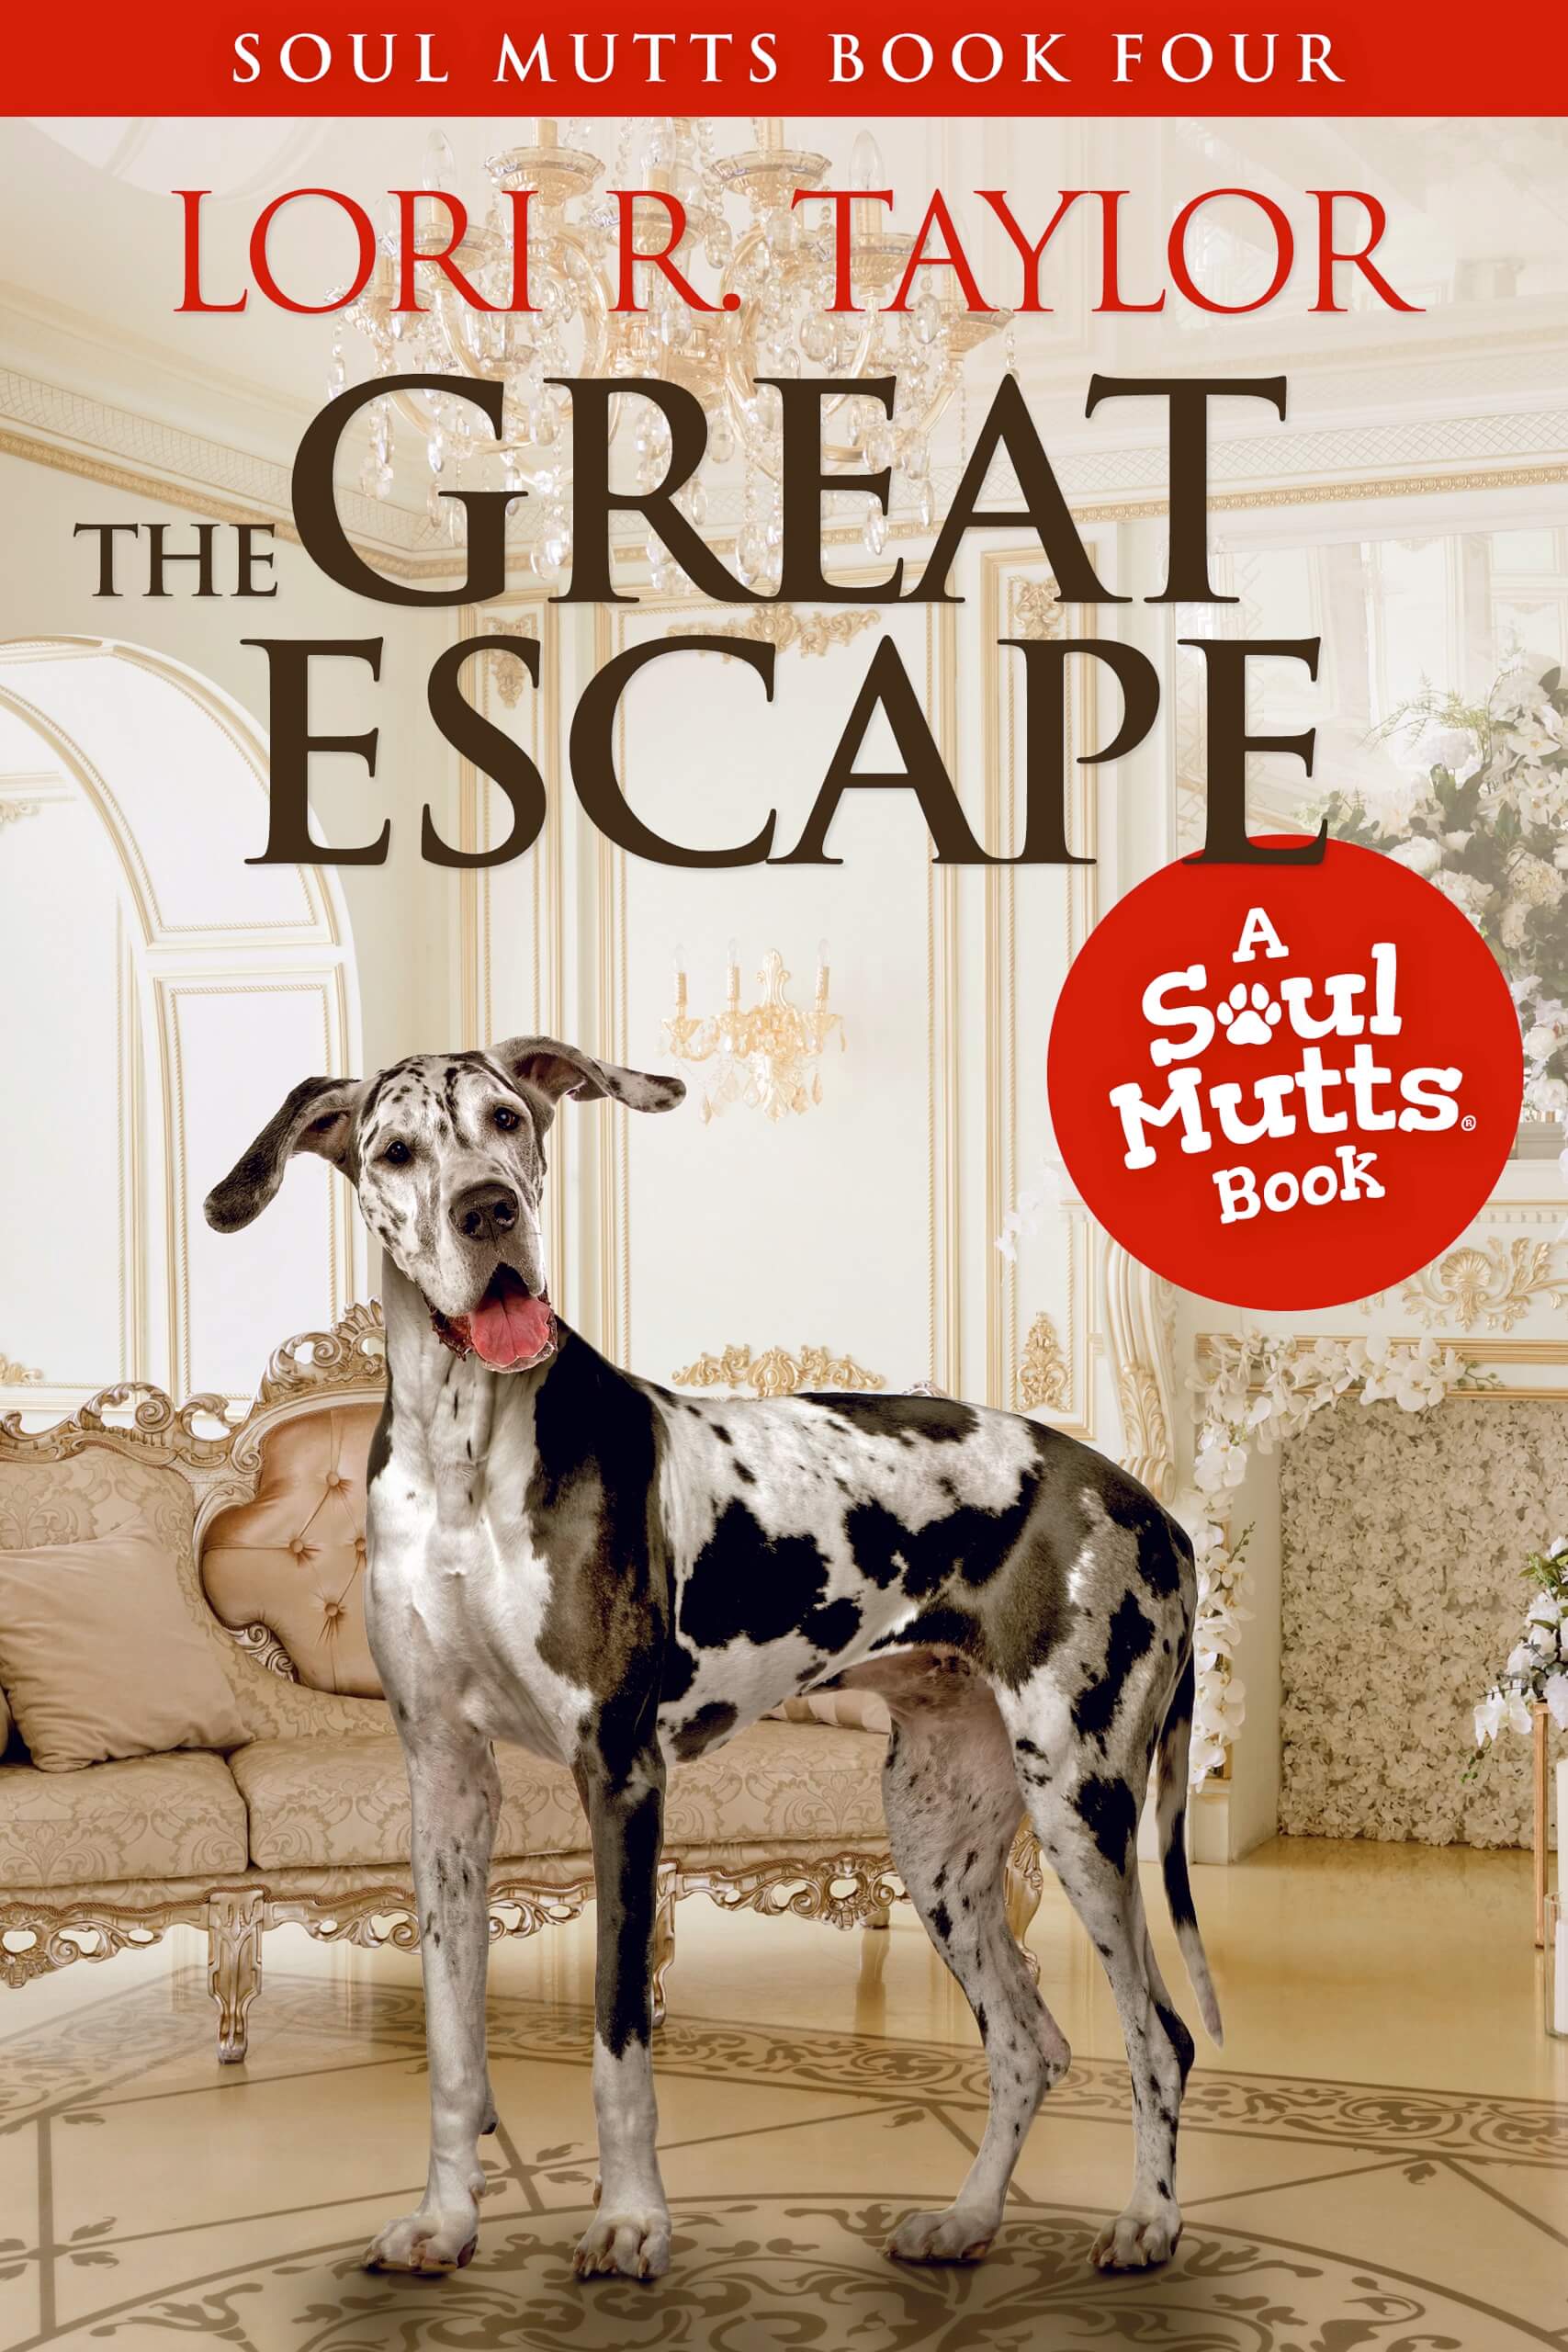 FREE: The Great Escape by Lori R. Taylor